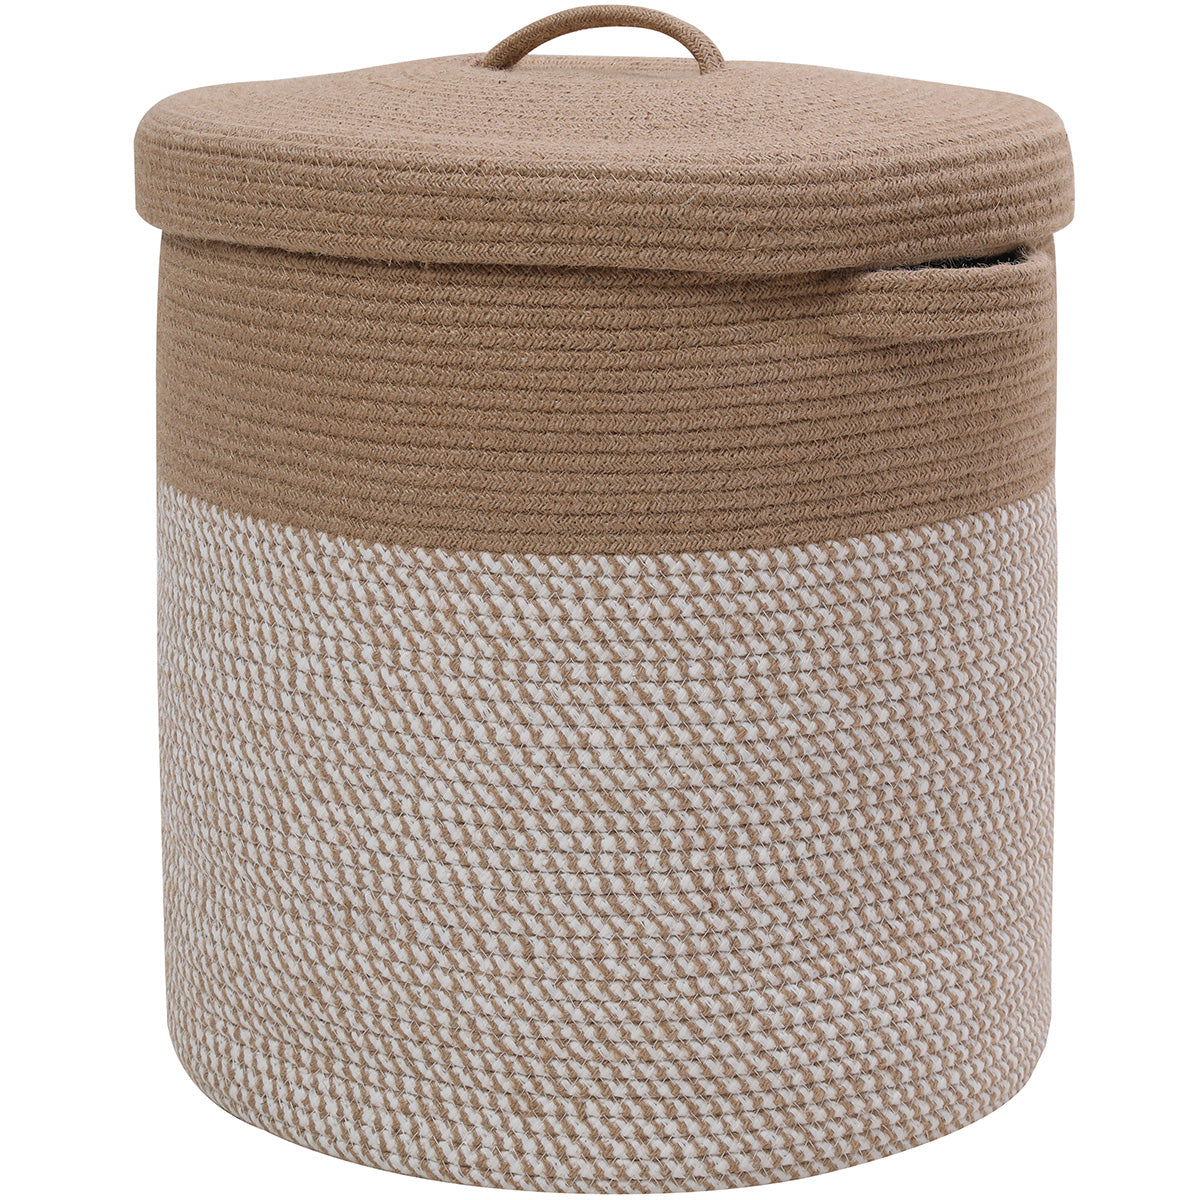 16" x 16" x 18" Extra Large Storage Basket with Lid, Cotton Rope Storage Baskets, Laundry Hamper, Toy Bin, Jute/White Mix Basket with Cover